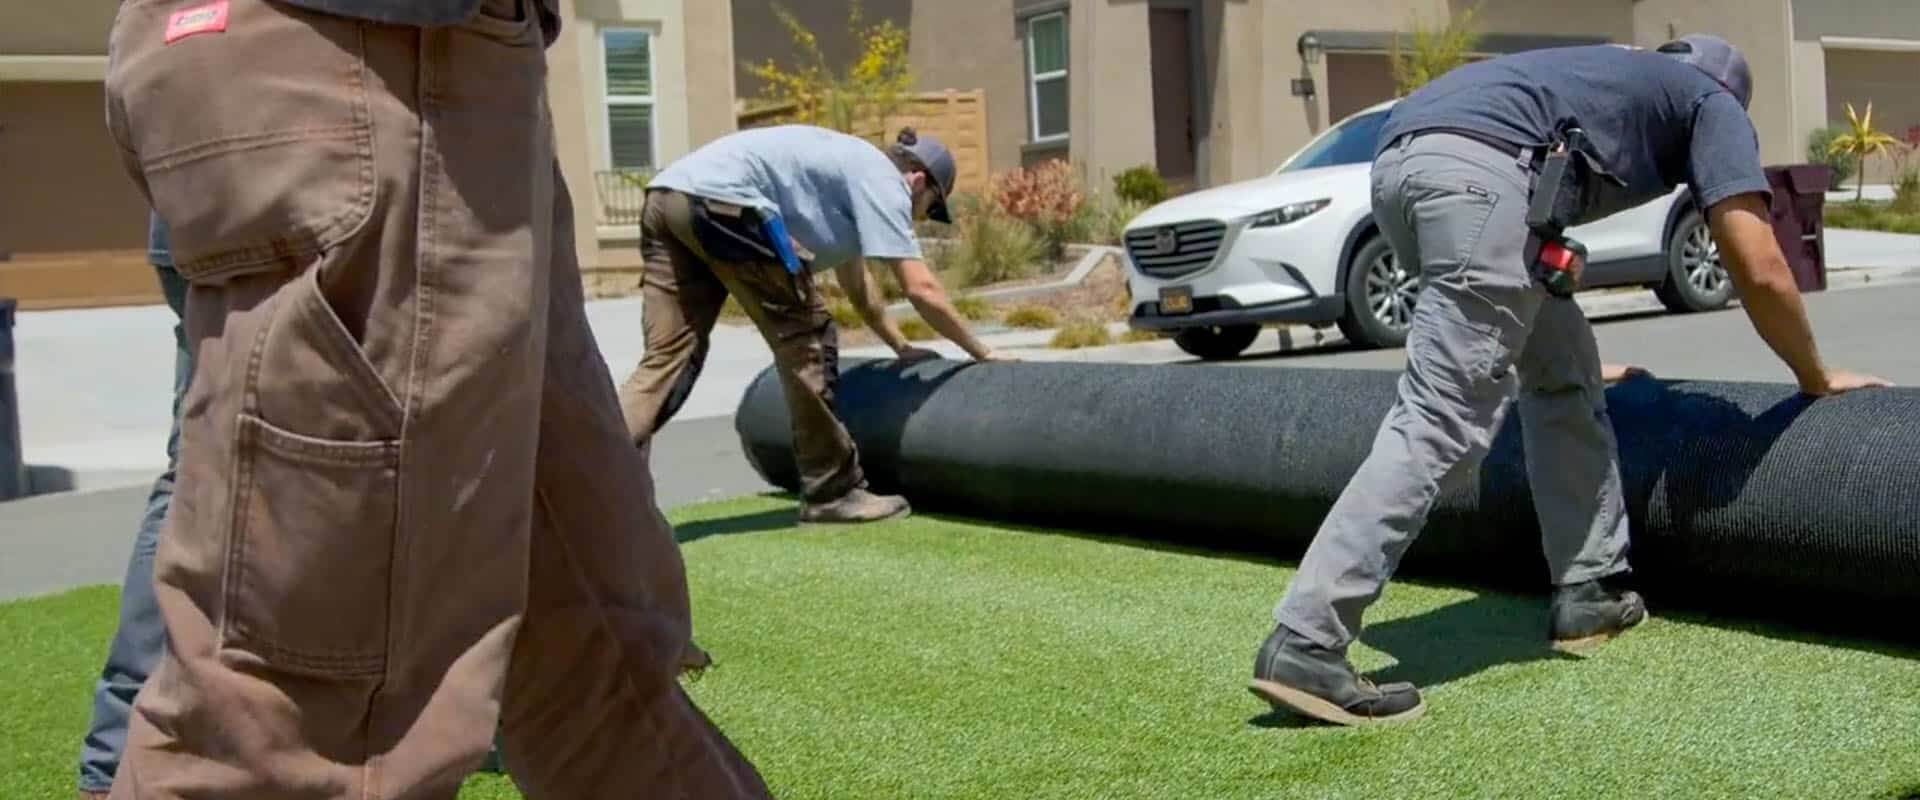 Two Ways to Install Artificial Turf on Concrete